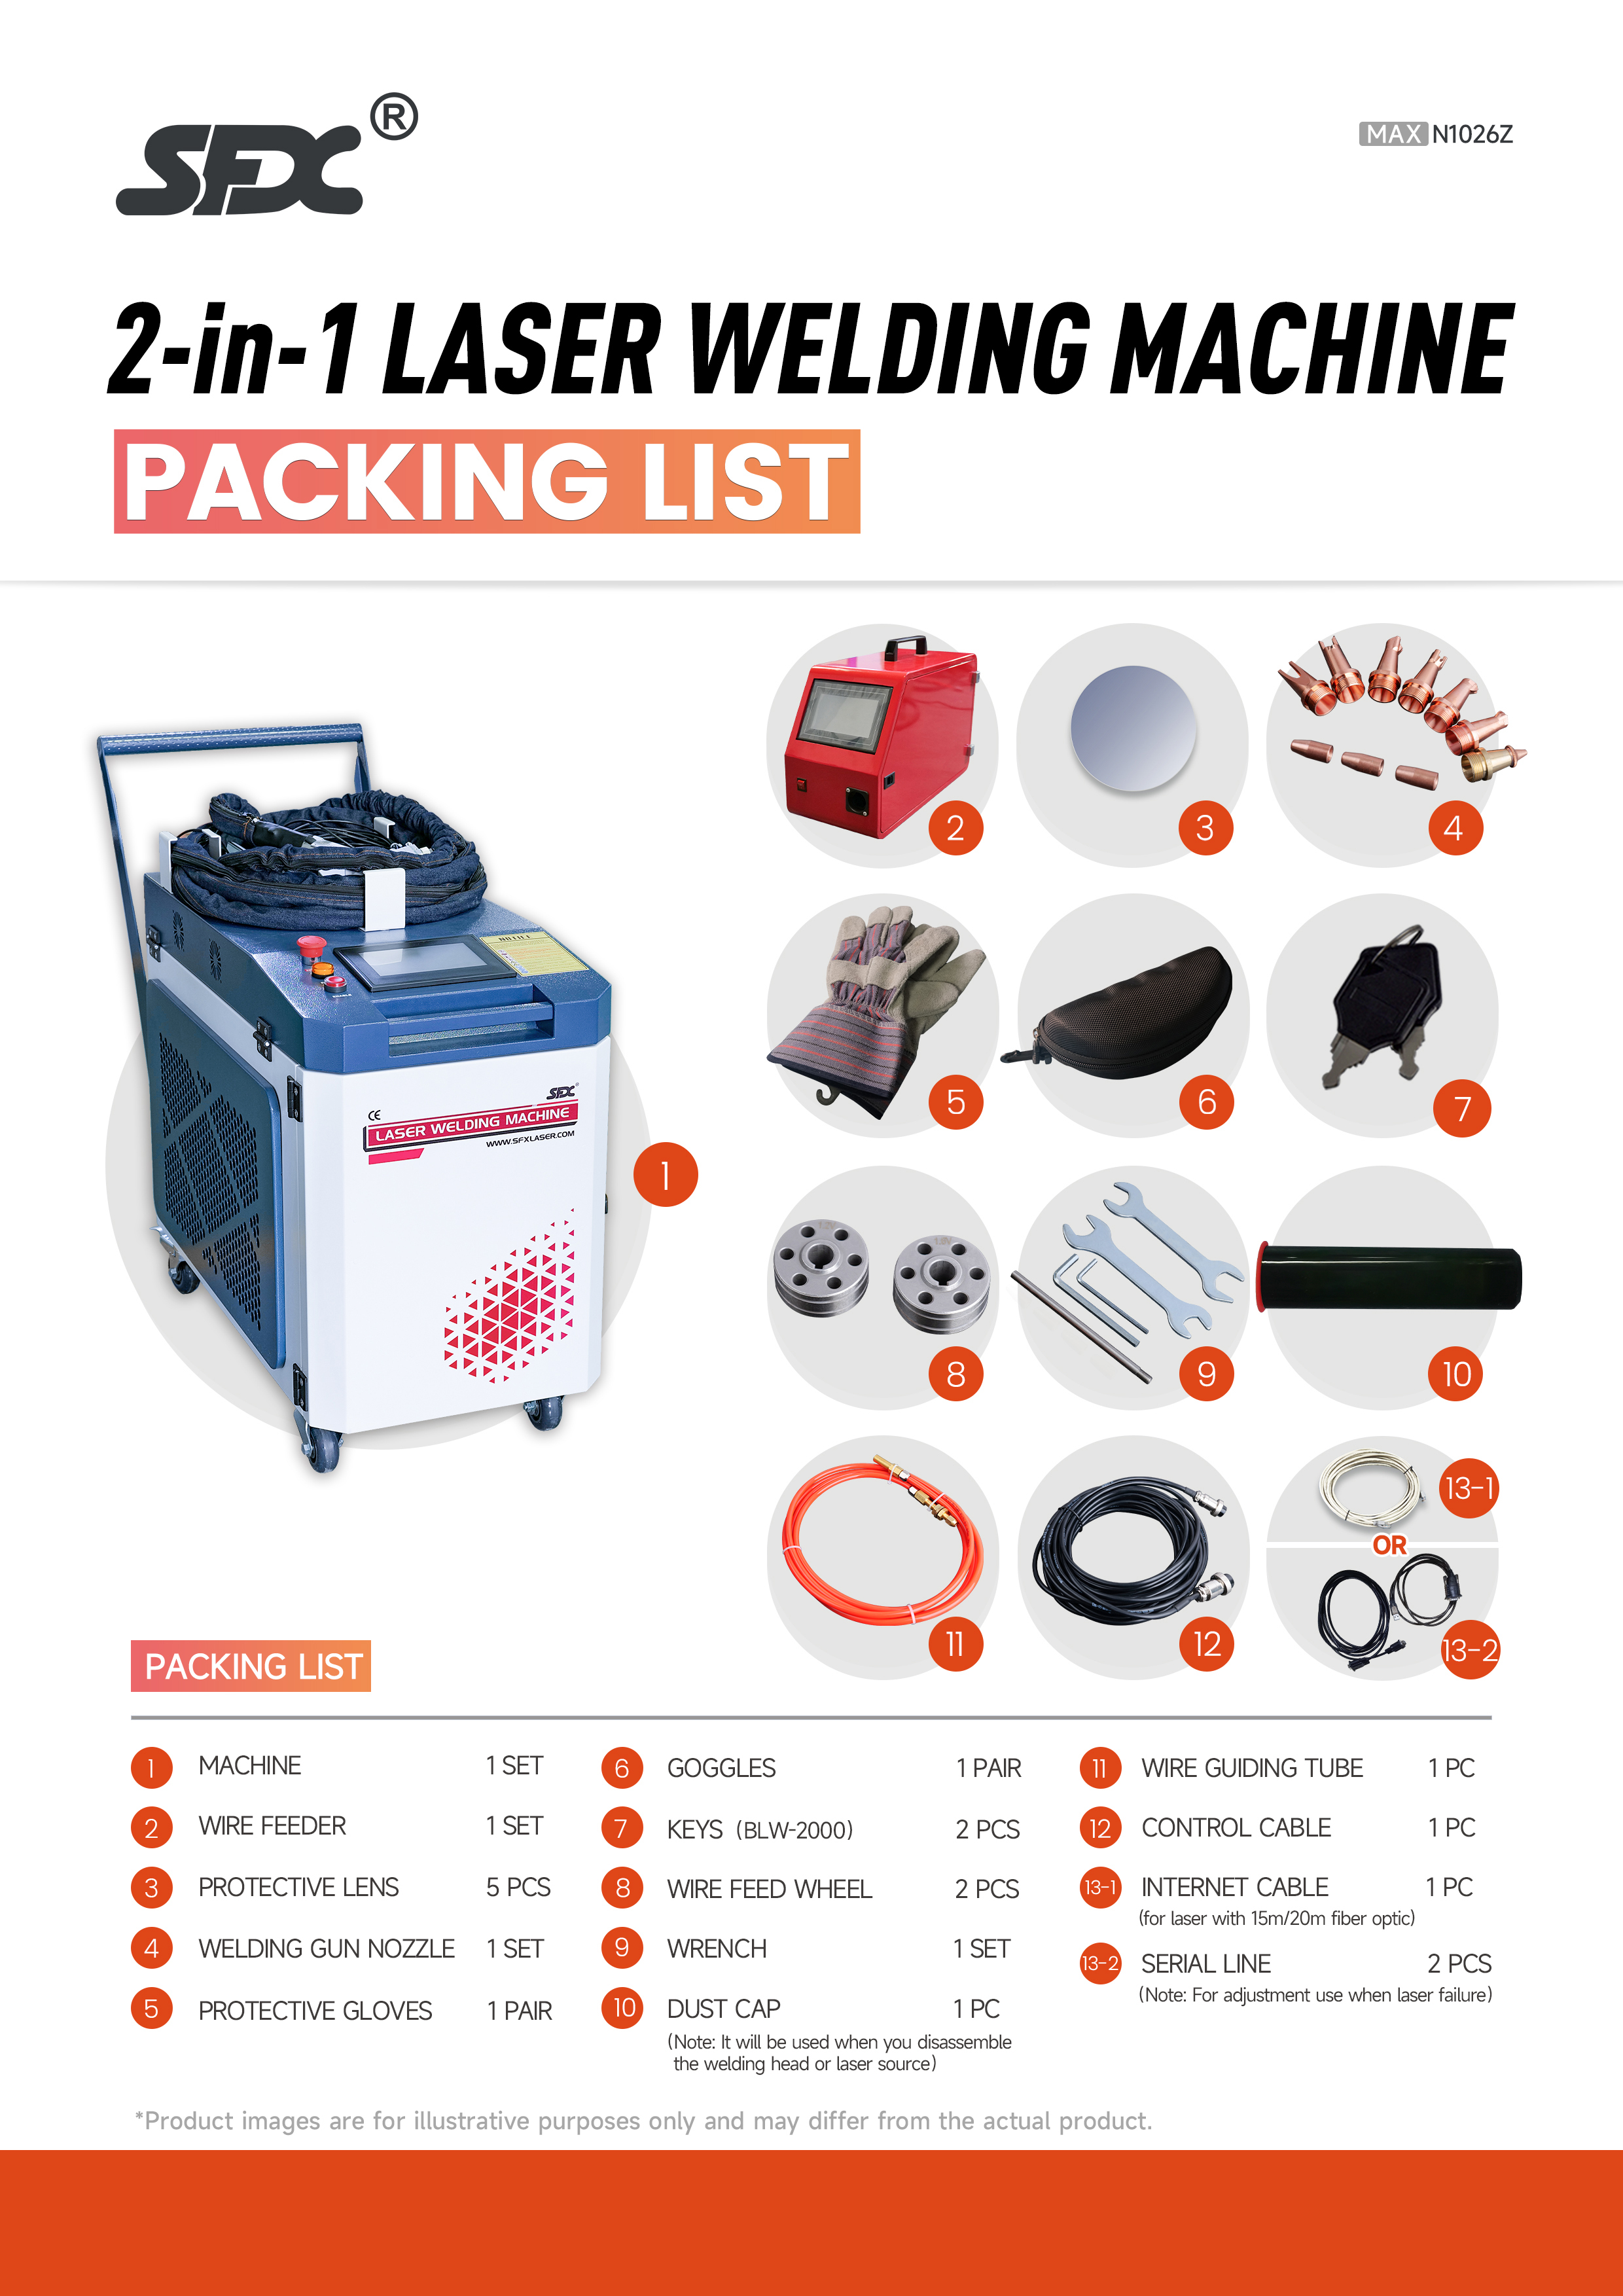  SFX 2 in 1 Laser Welding and Weld Seam Cleaning Machine 2000W for Convenient Metal Welding and Laser Welding Seam Cleaning, with Dual Functionality in the Laser Gun Head for Welding and Cleaning  SFX 2 in 1 Laser Welding and Weld Seam Cleaning Machine for Convenient Metal Welding and Laser Welding Seam Cleaning, with Dual Functionality in the Laser Gun Head for Welding and Cleaning 2 in 1 laser welder cleaner,portable laser welding machine with cleaning function,laser welding laser cleaning 2 in 1 machine,laser welding machine for sale,2 in 1 laser welding machine laser cleaning machine for sale,SFX laser welding machine,SFX portable laser welder and laser cleaner,handheld metal laser welding machine,handheld laser welder machine,laser welding equipment supplier